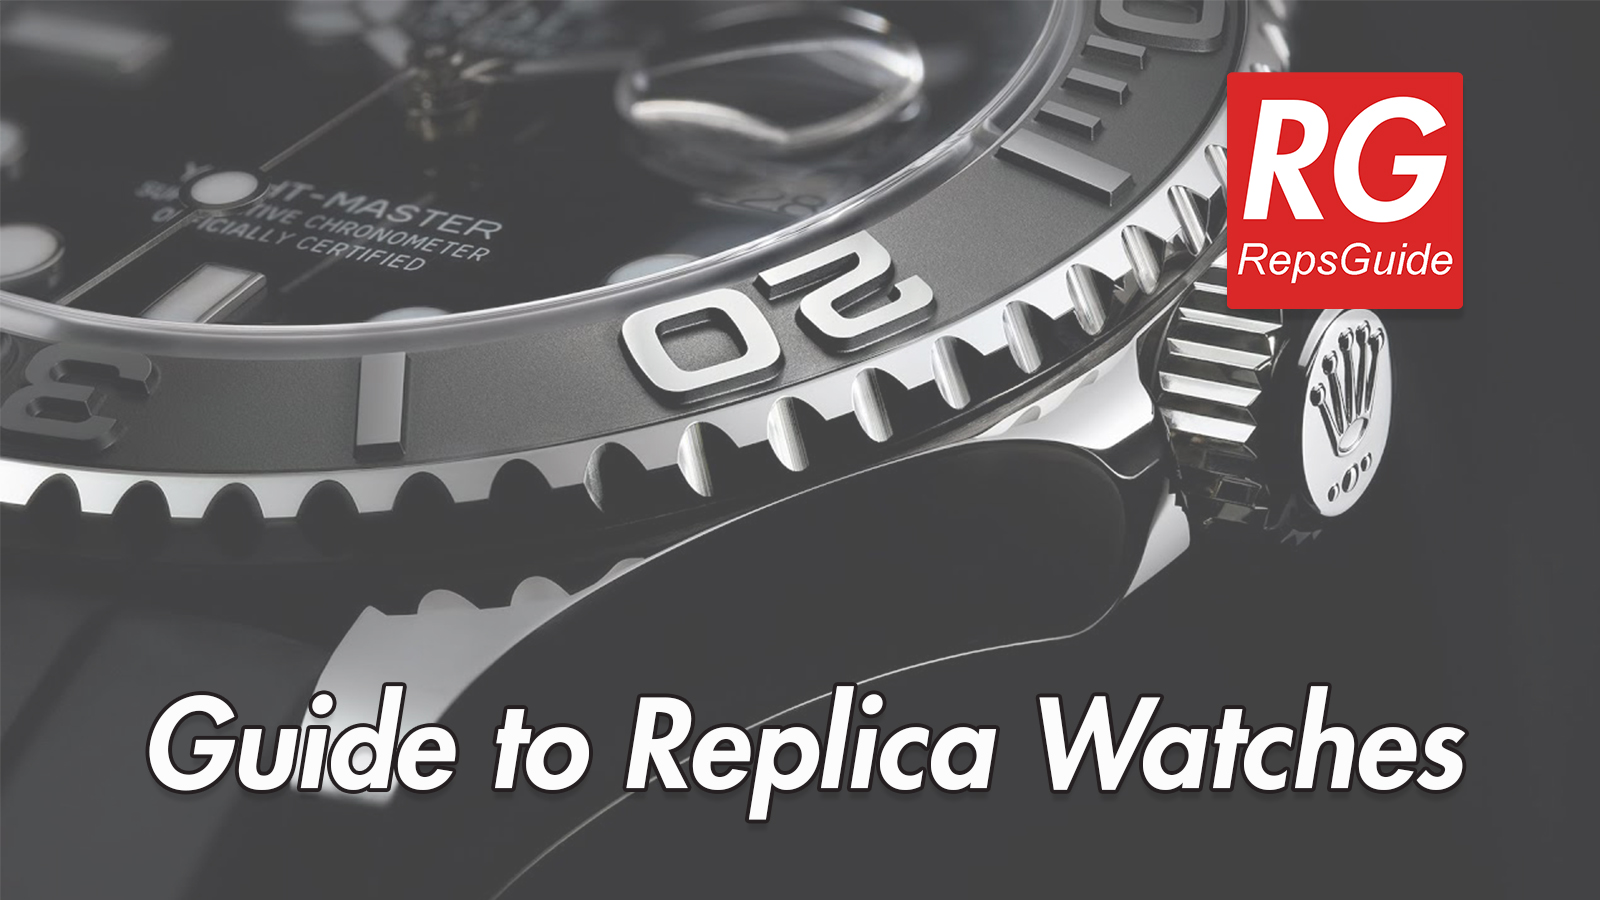 The-ultimate-guide-to-replica-watches.jpg